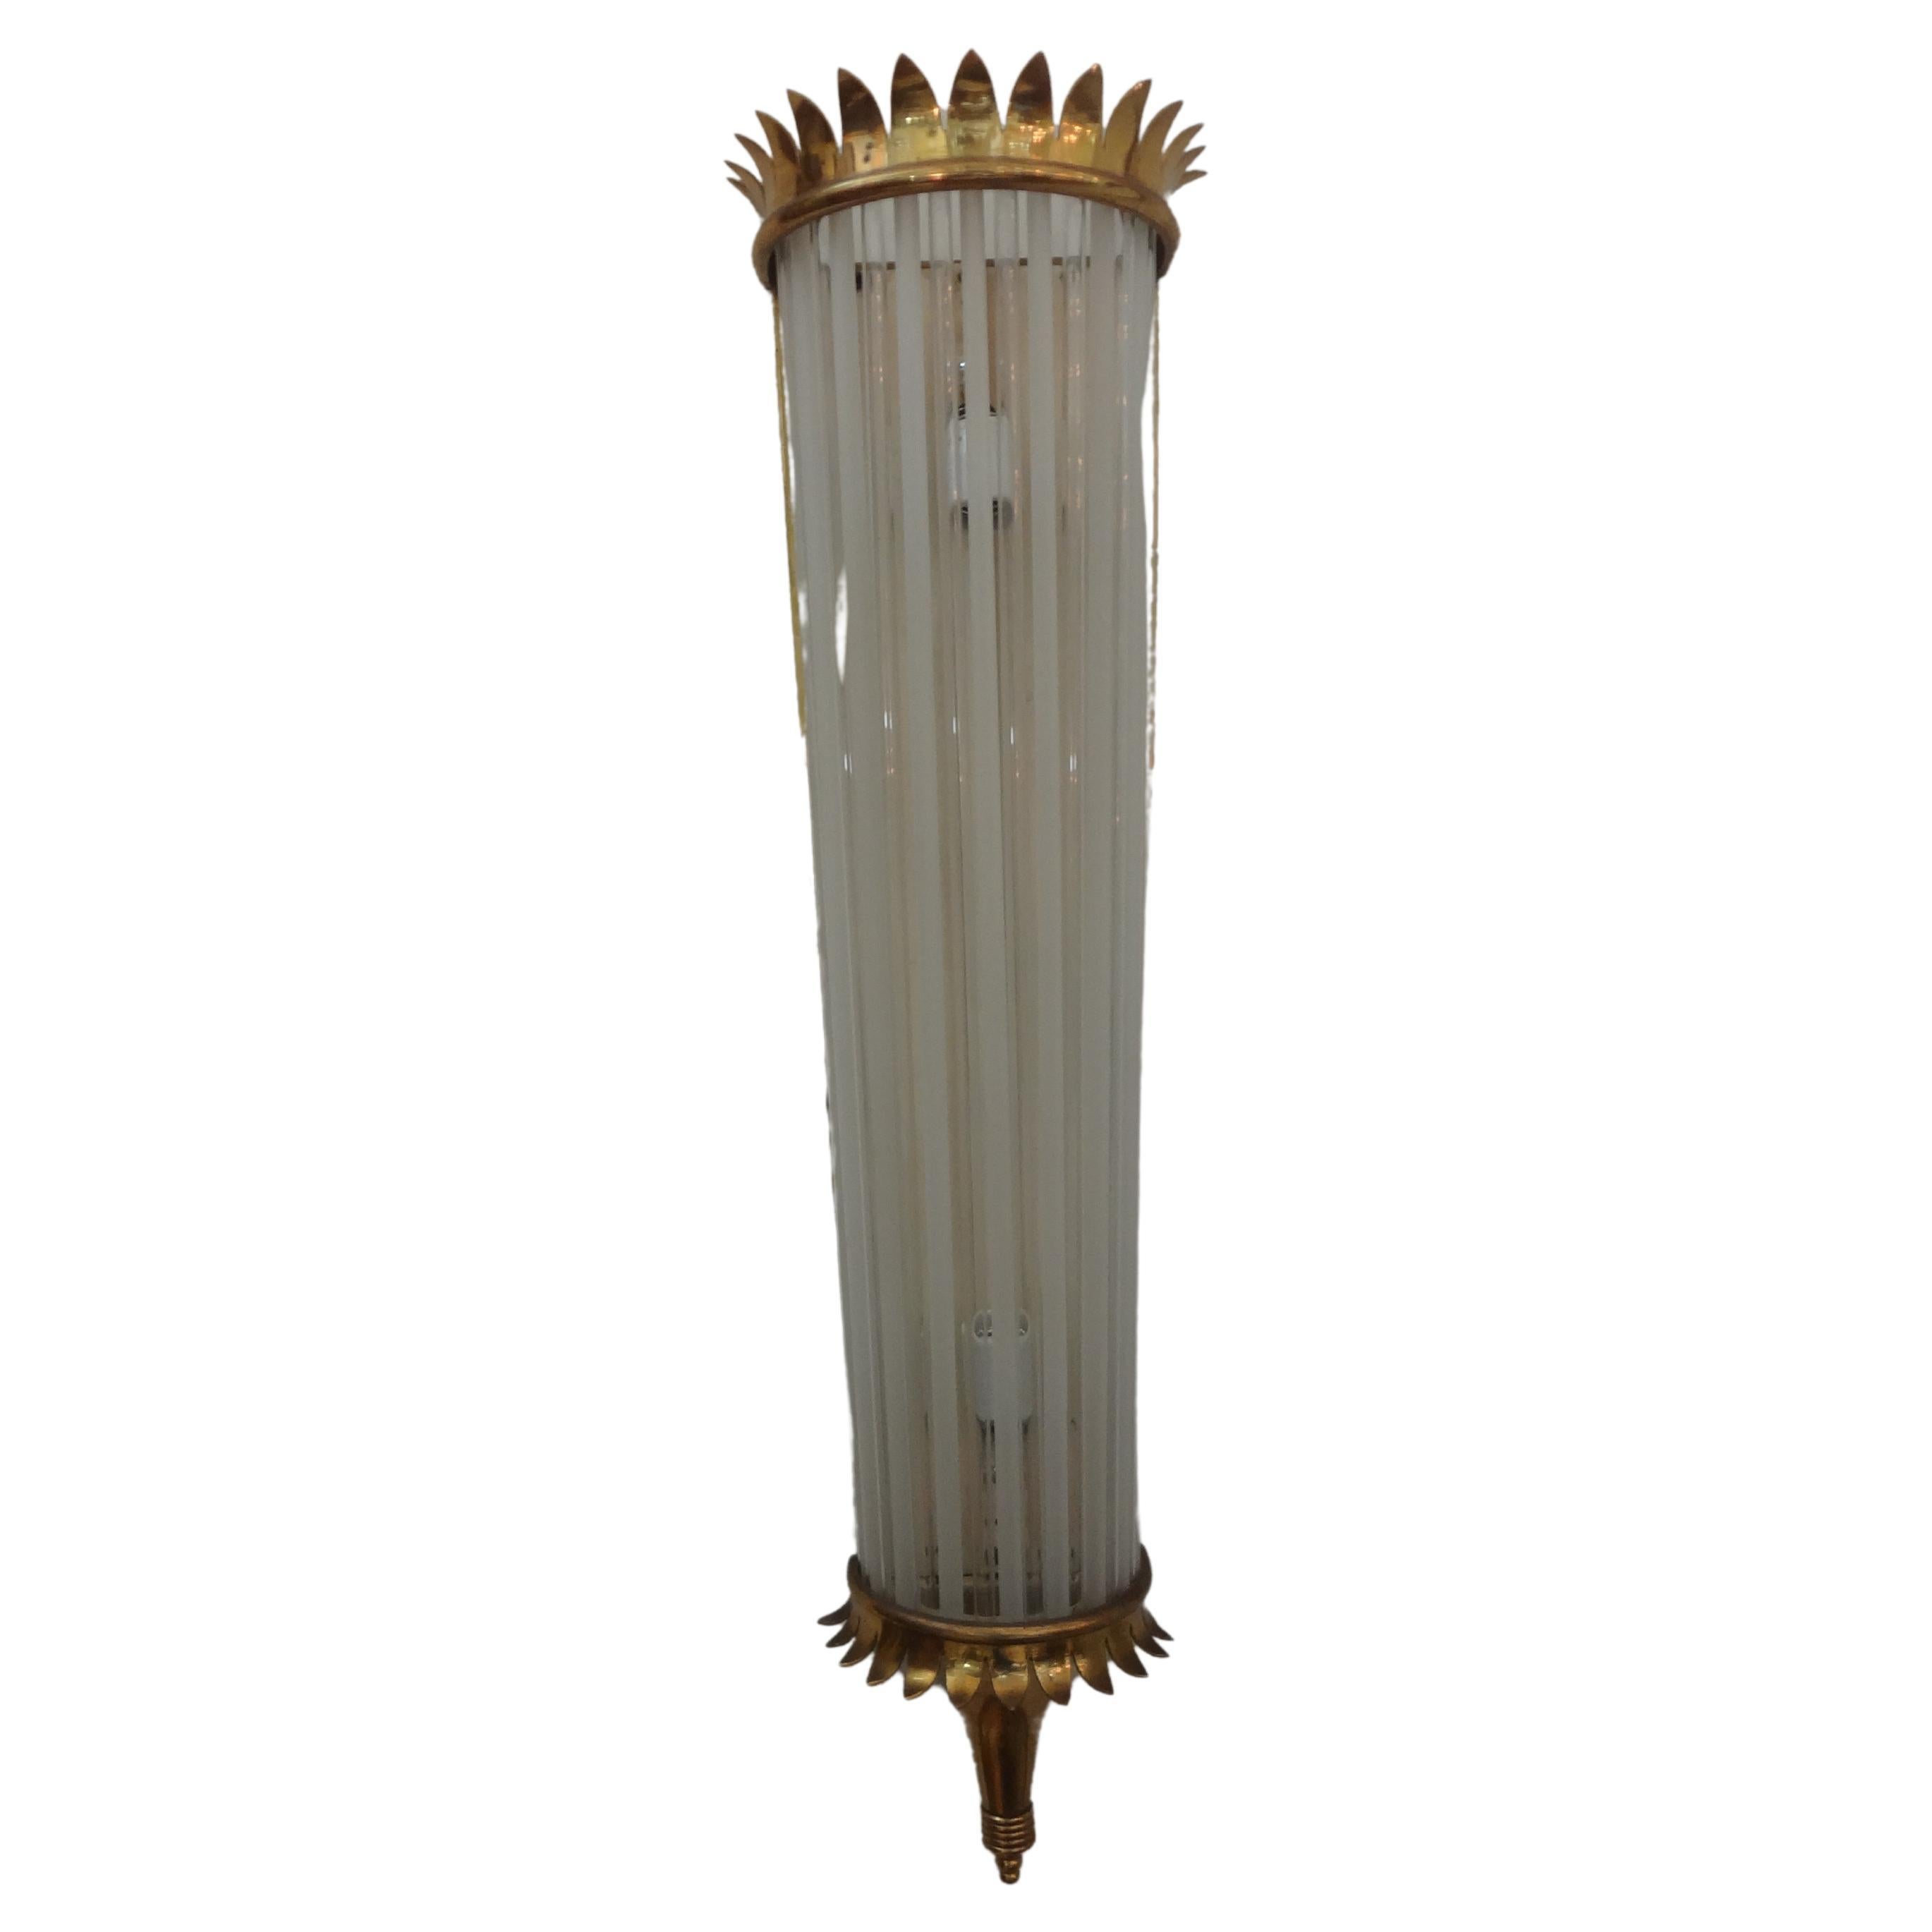 Outstanding Large Pair Of French Art Deco Brass And Glass Sconces.
We offer a magnificent pair of French Art Deco brass sconces with alternating clear and frosted glass rods. Our large scale French sconces have been newly wired each having 2 Edison